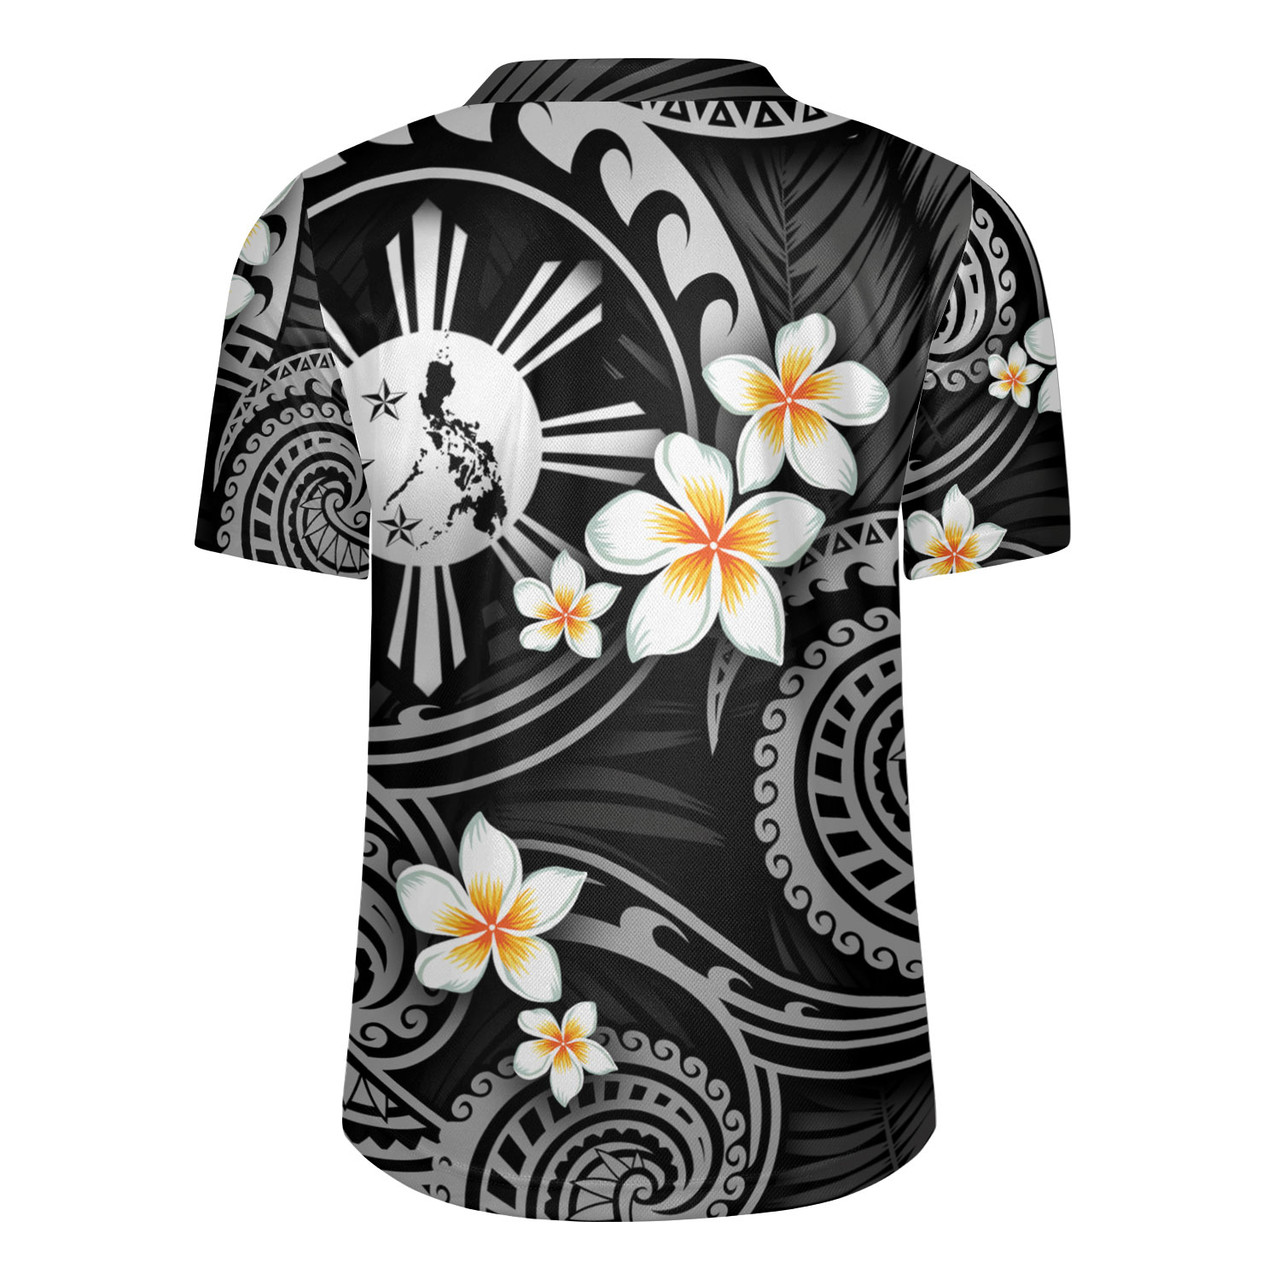 Philippines Filipinos Rugby Jersey Plumeria Flowers Tribal Motif Style